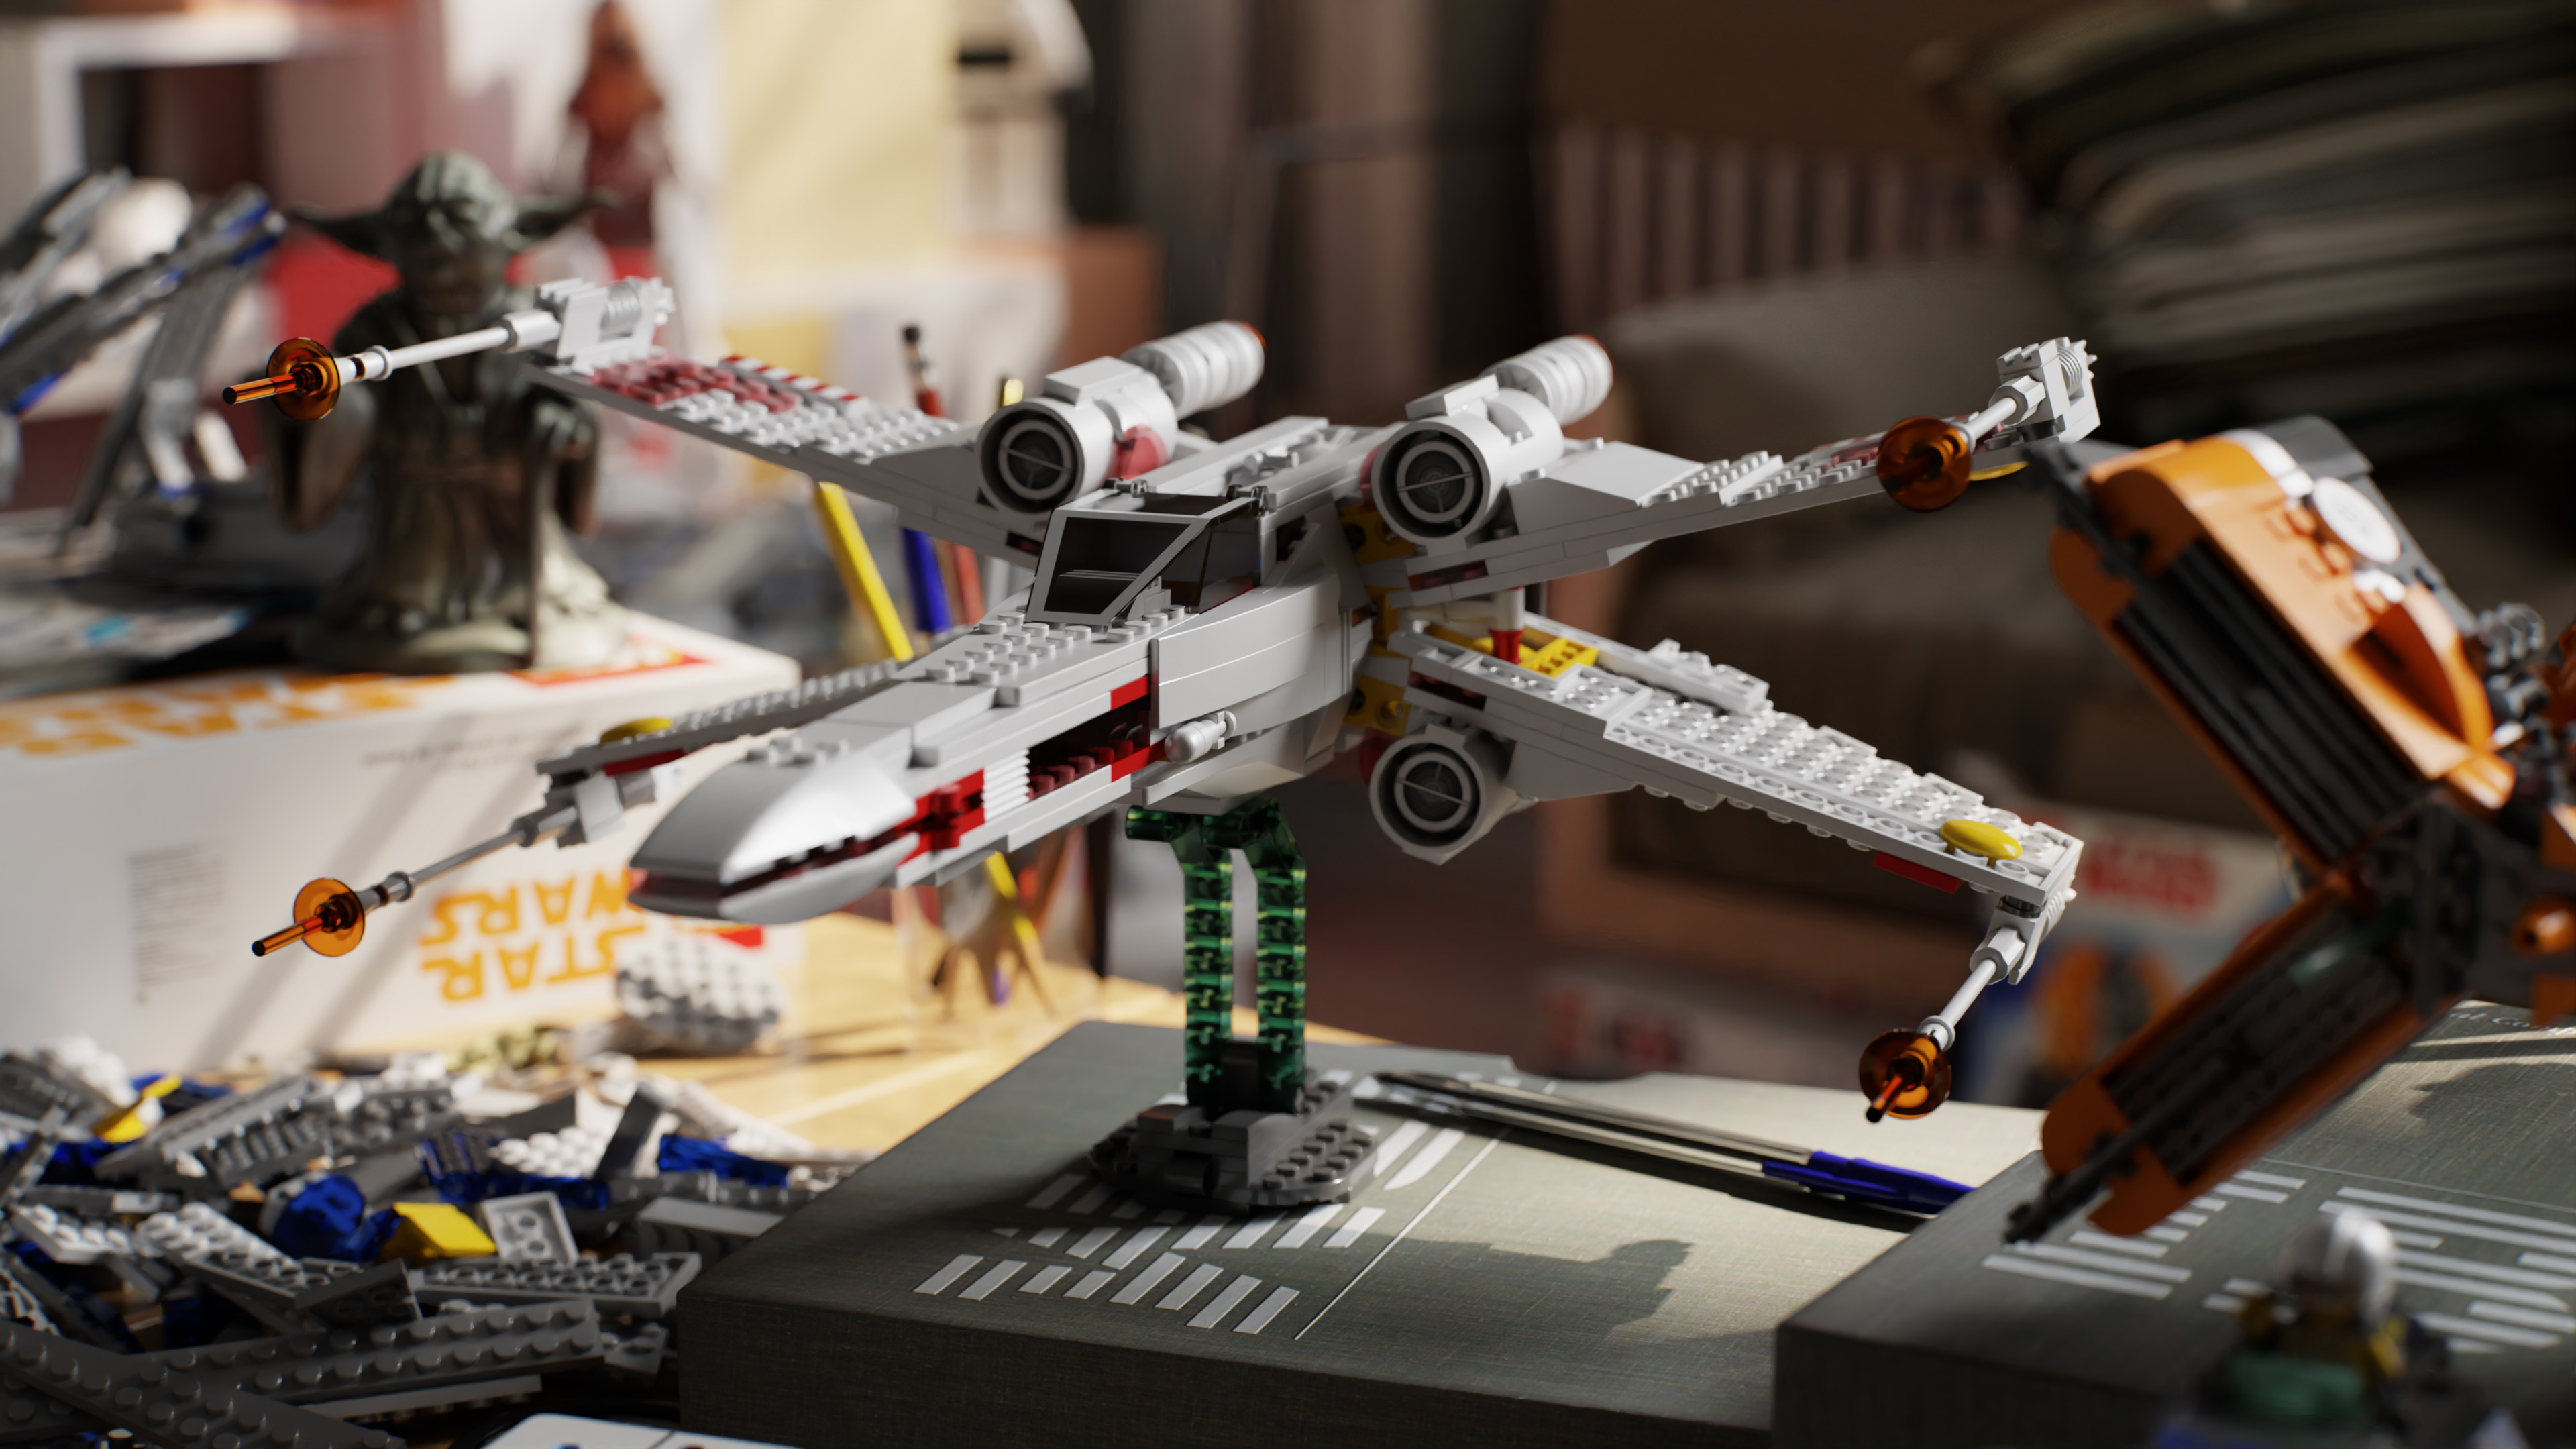 Star Wars LEGO Toys X Wing Star Wars Ships Science Fiction 3840x2160